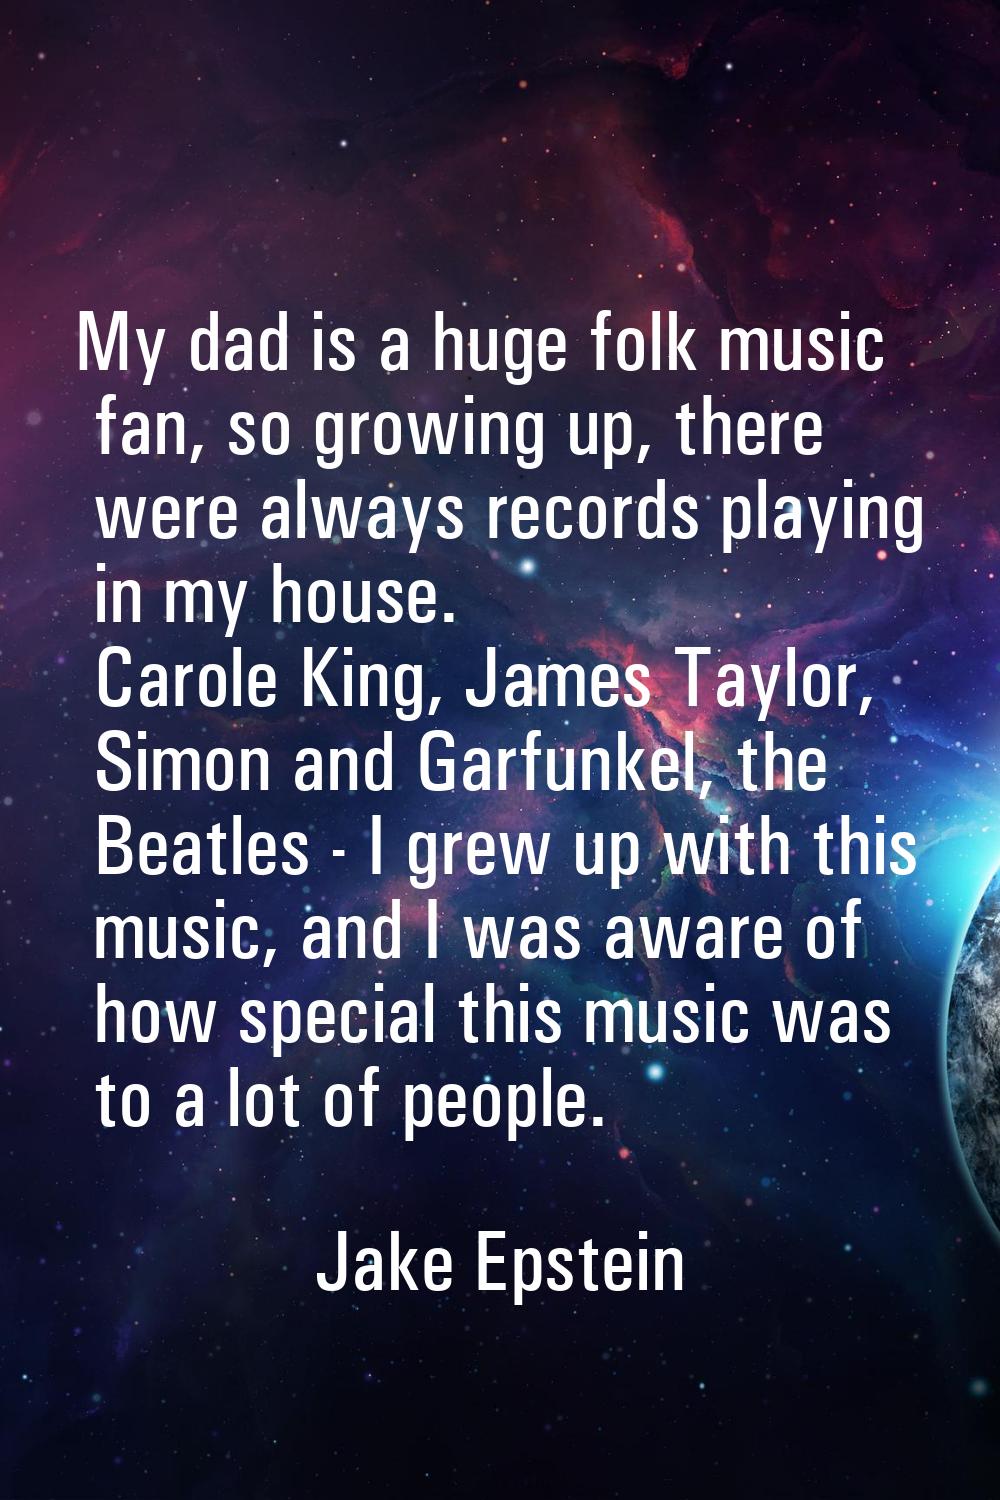 My dad is a huge folk music fan, so growing up, there were always records playing in my house. Caro